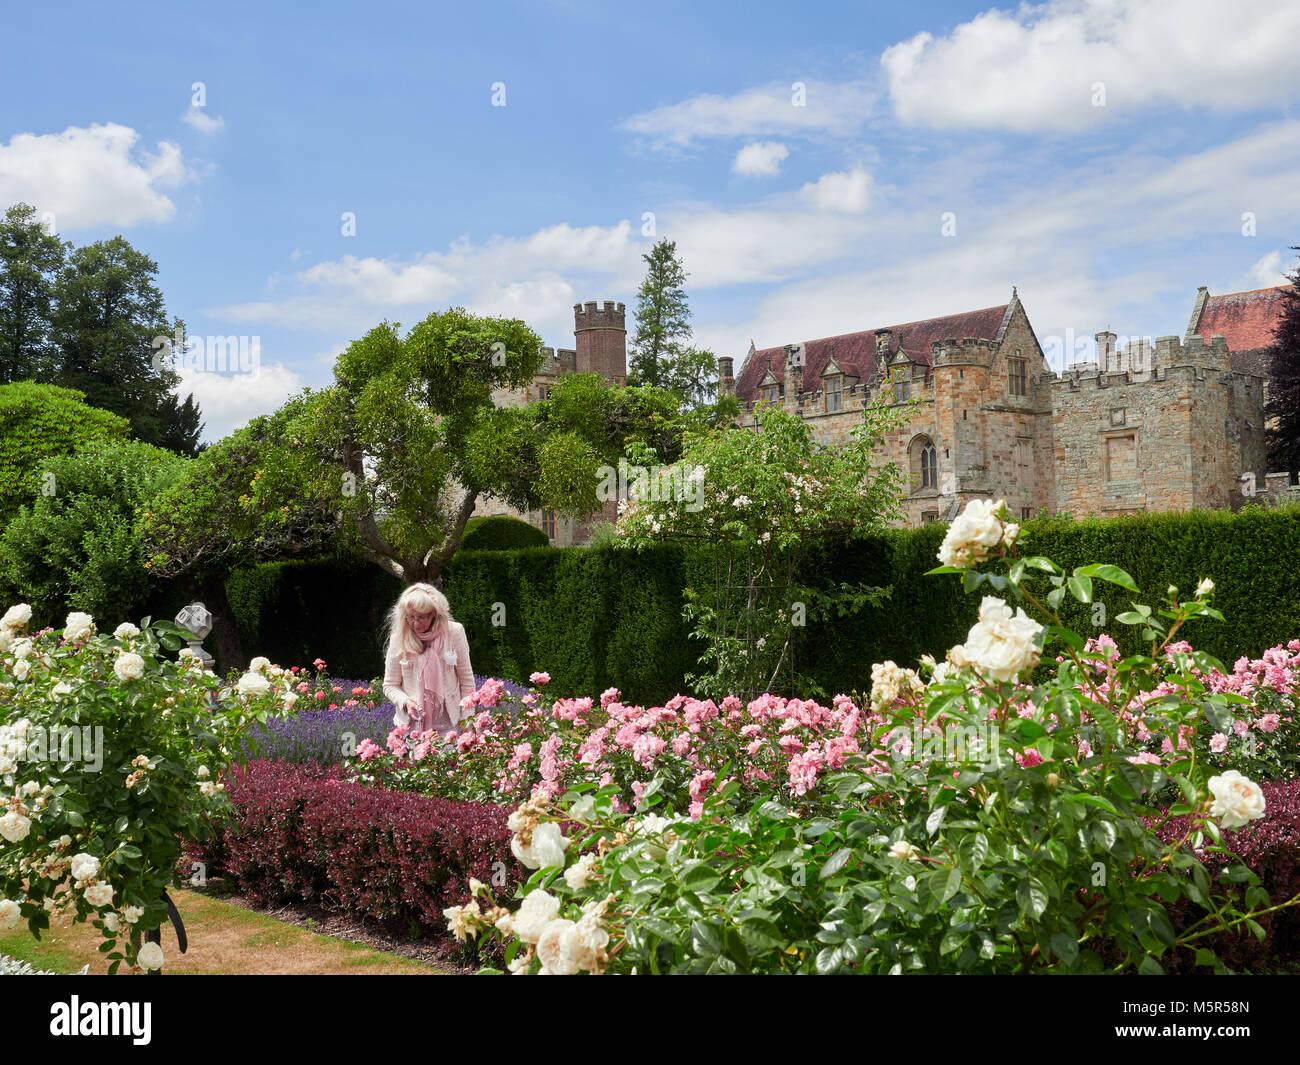 Historic medieval grounds and buildings of Penshurst Place. Stock Photo